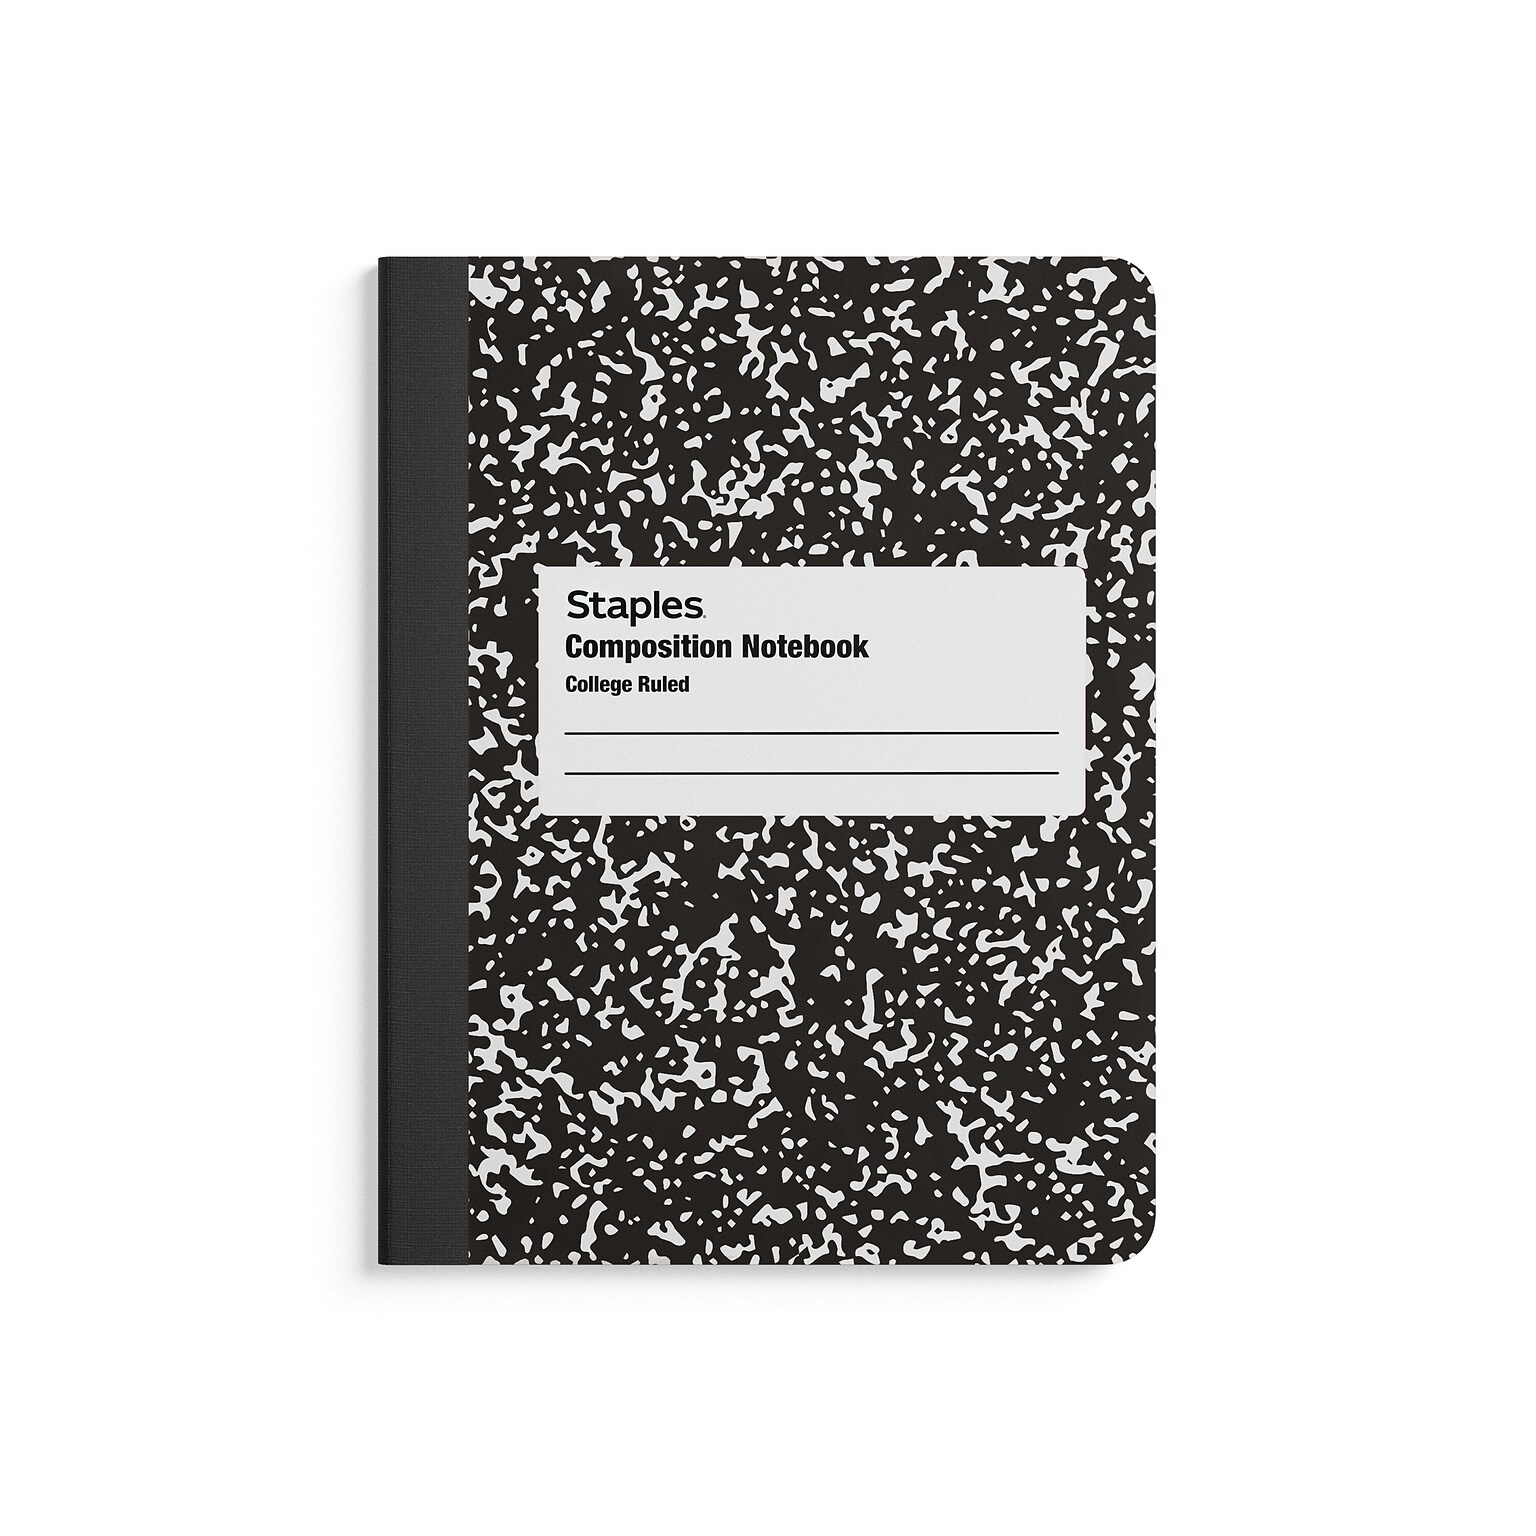 Staples Composition Notebook, 7.5 x 9.75, College Ruled, 100 Sheets, Black/White, 48/Carton (40451CT)